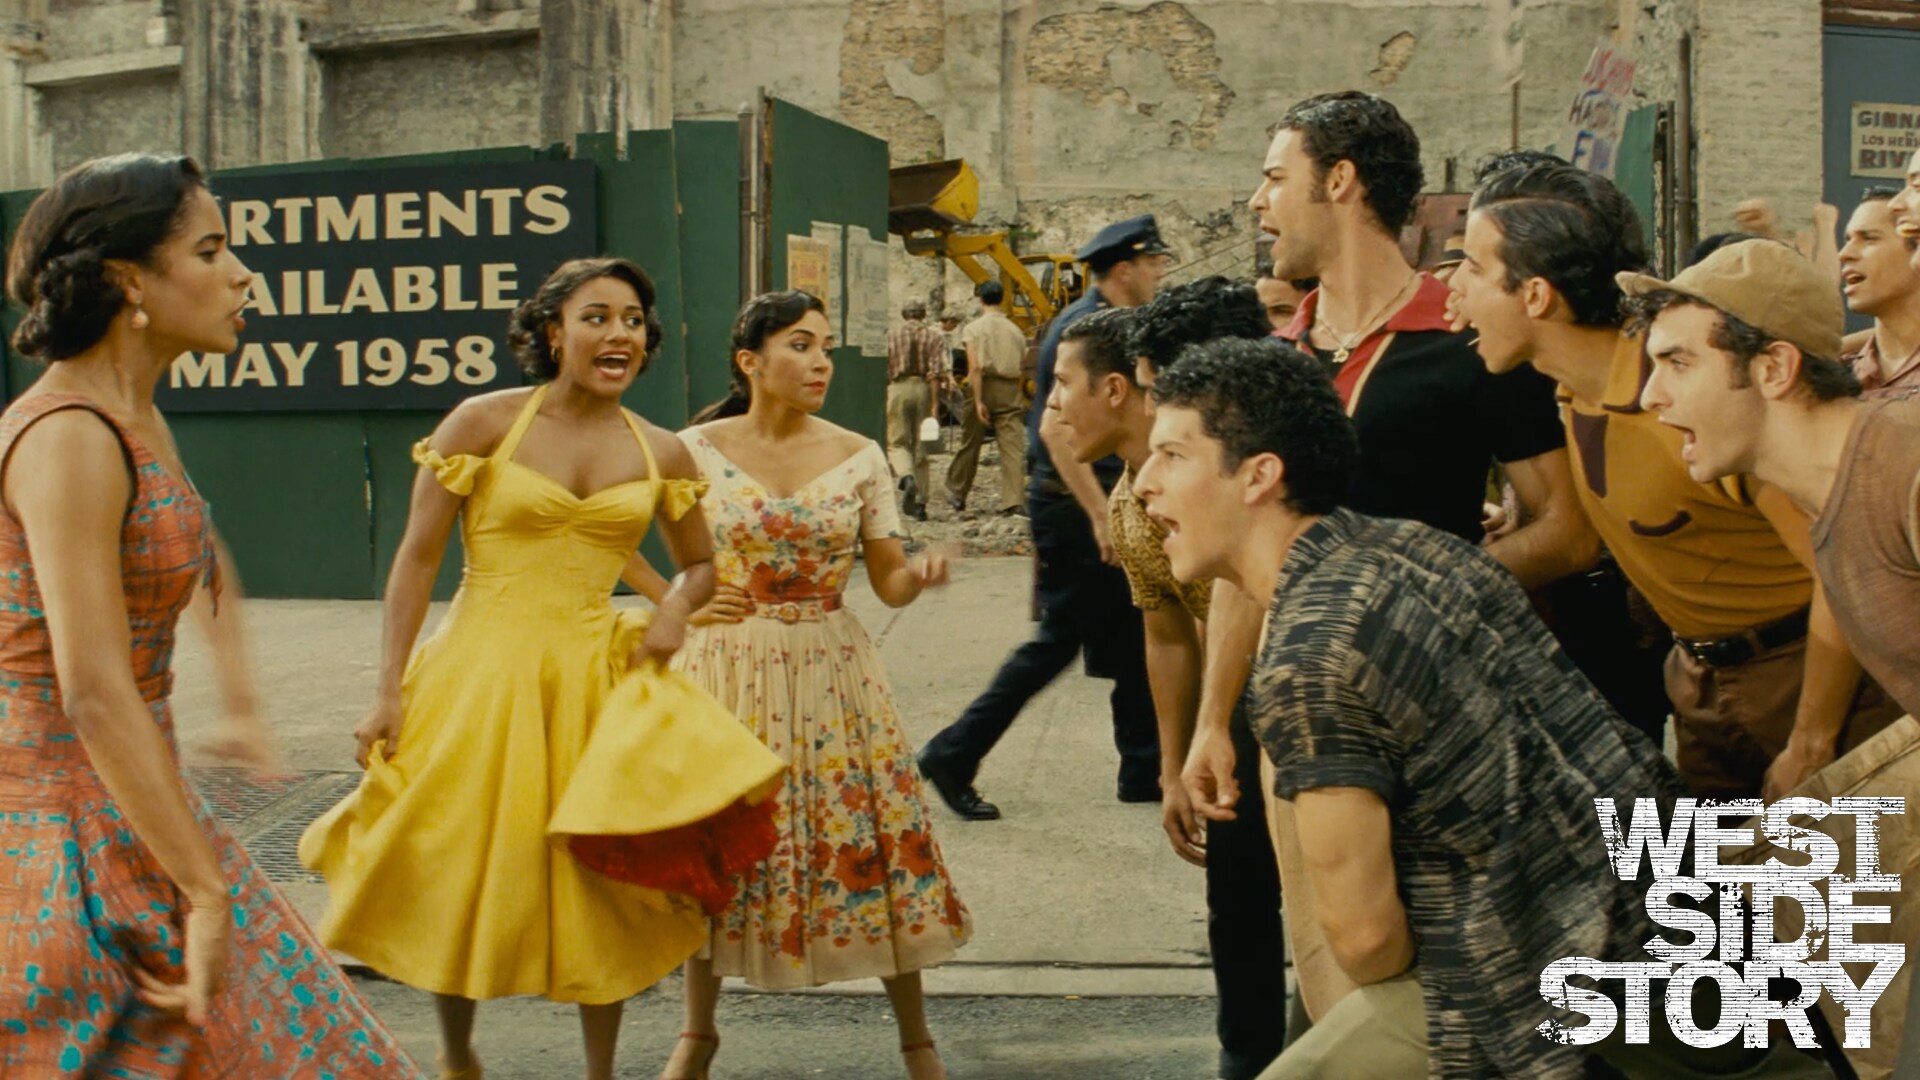 :star:️ Steven Spielberg’s #WestSideStory is one of the most nominated movies of the year! :star:️ See the film critics and audiences around the world can’t stop talking about now playing only in theaters! Get Tickets: Fandango.com/WestSideStory